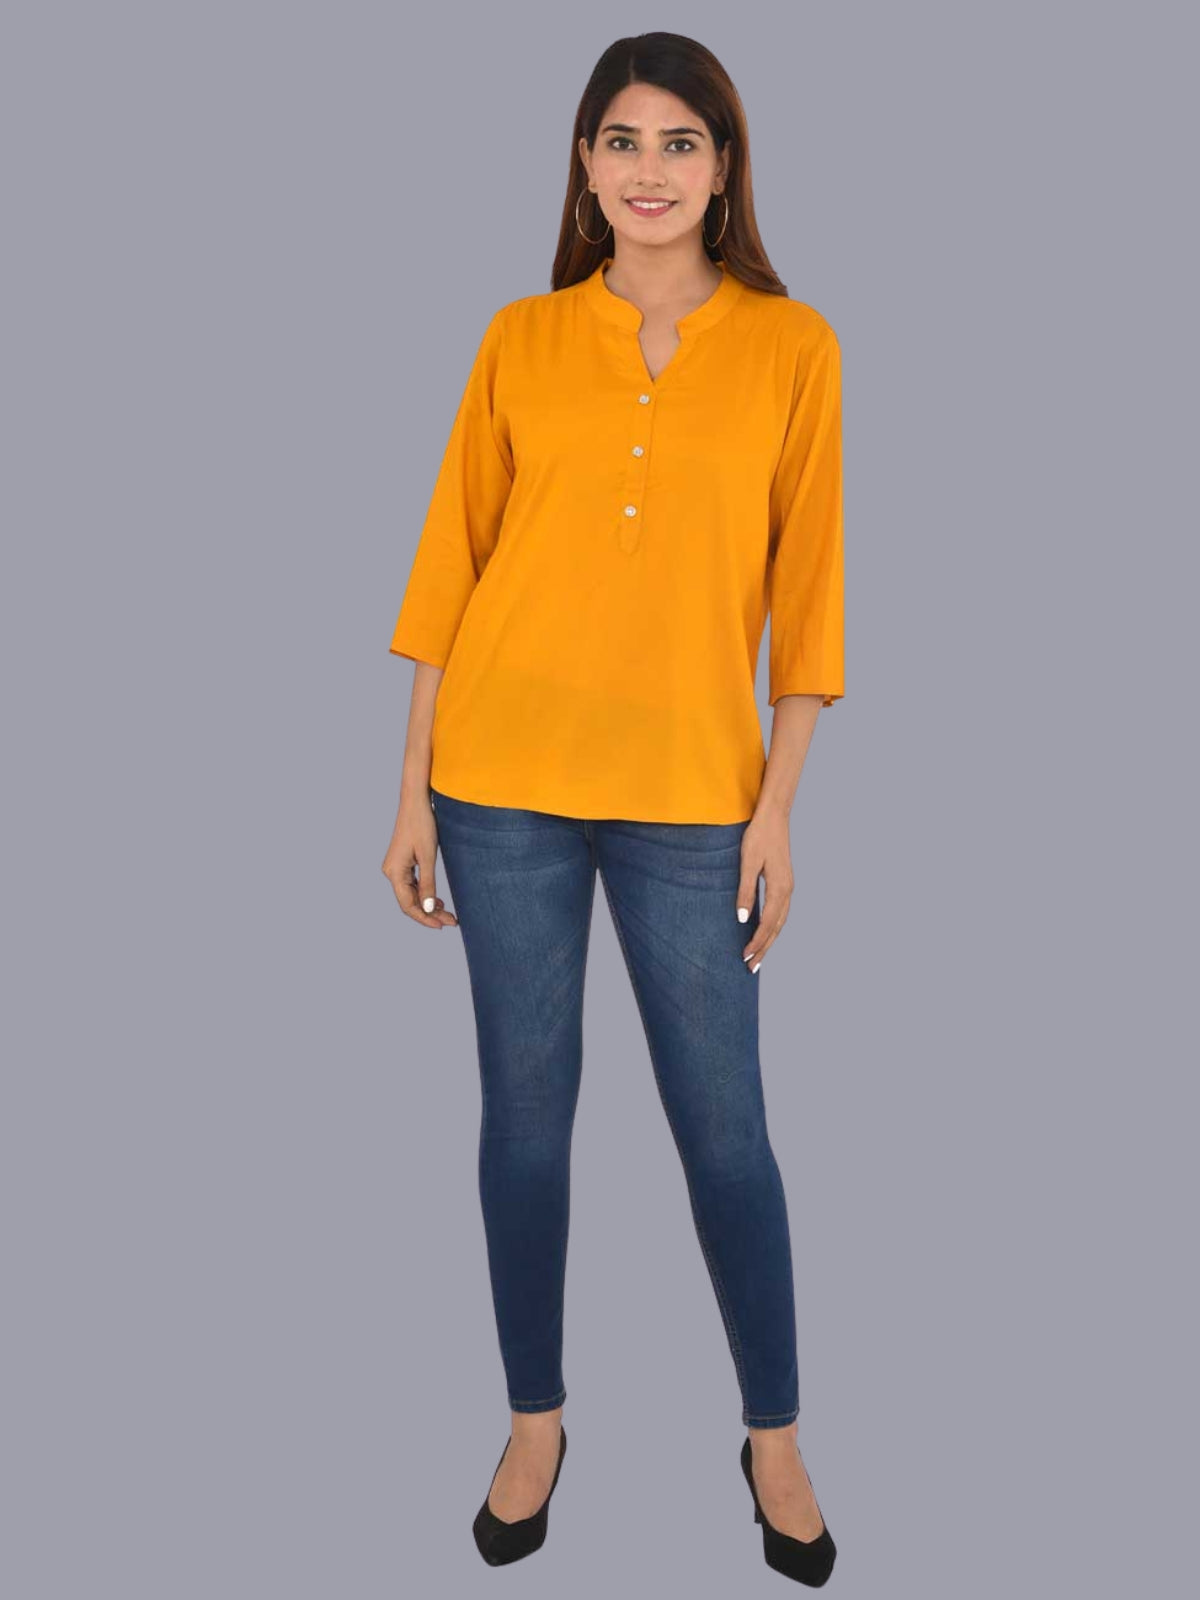 Womens Solid Yellow Chinese Collar Three Fourth Sleeve Rayon Tops